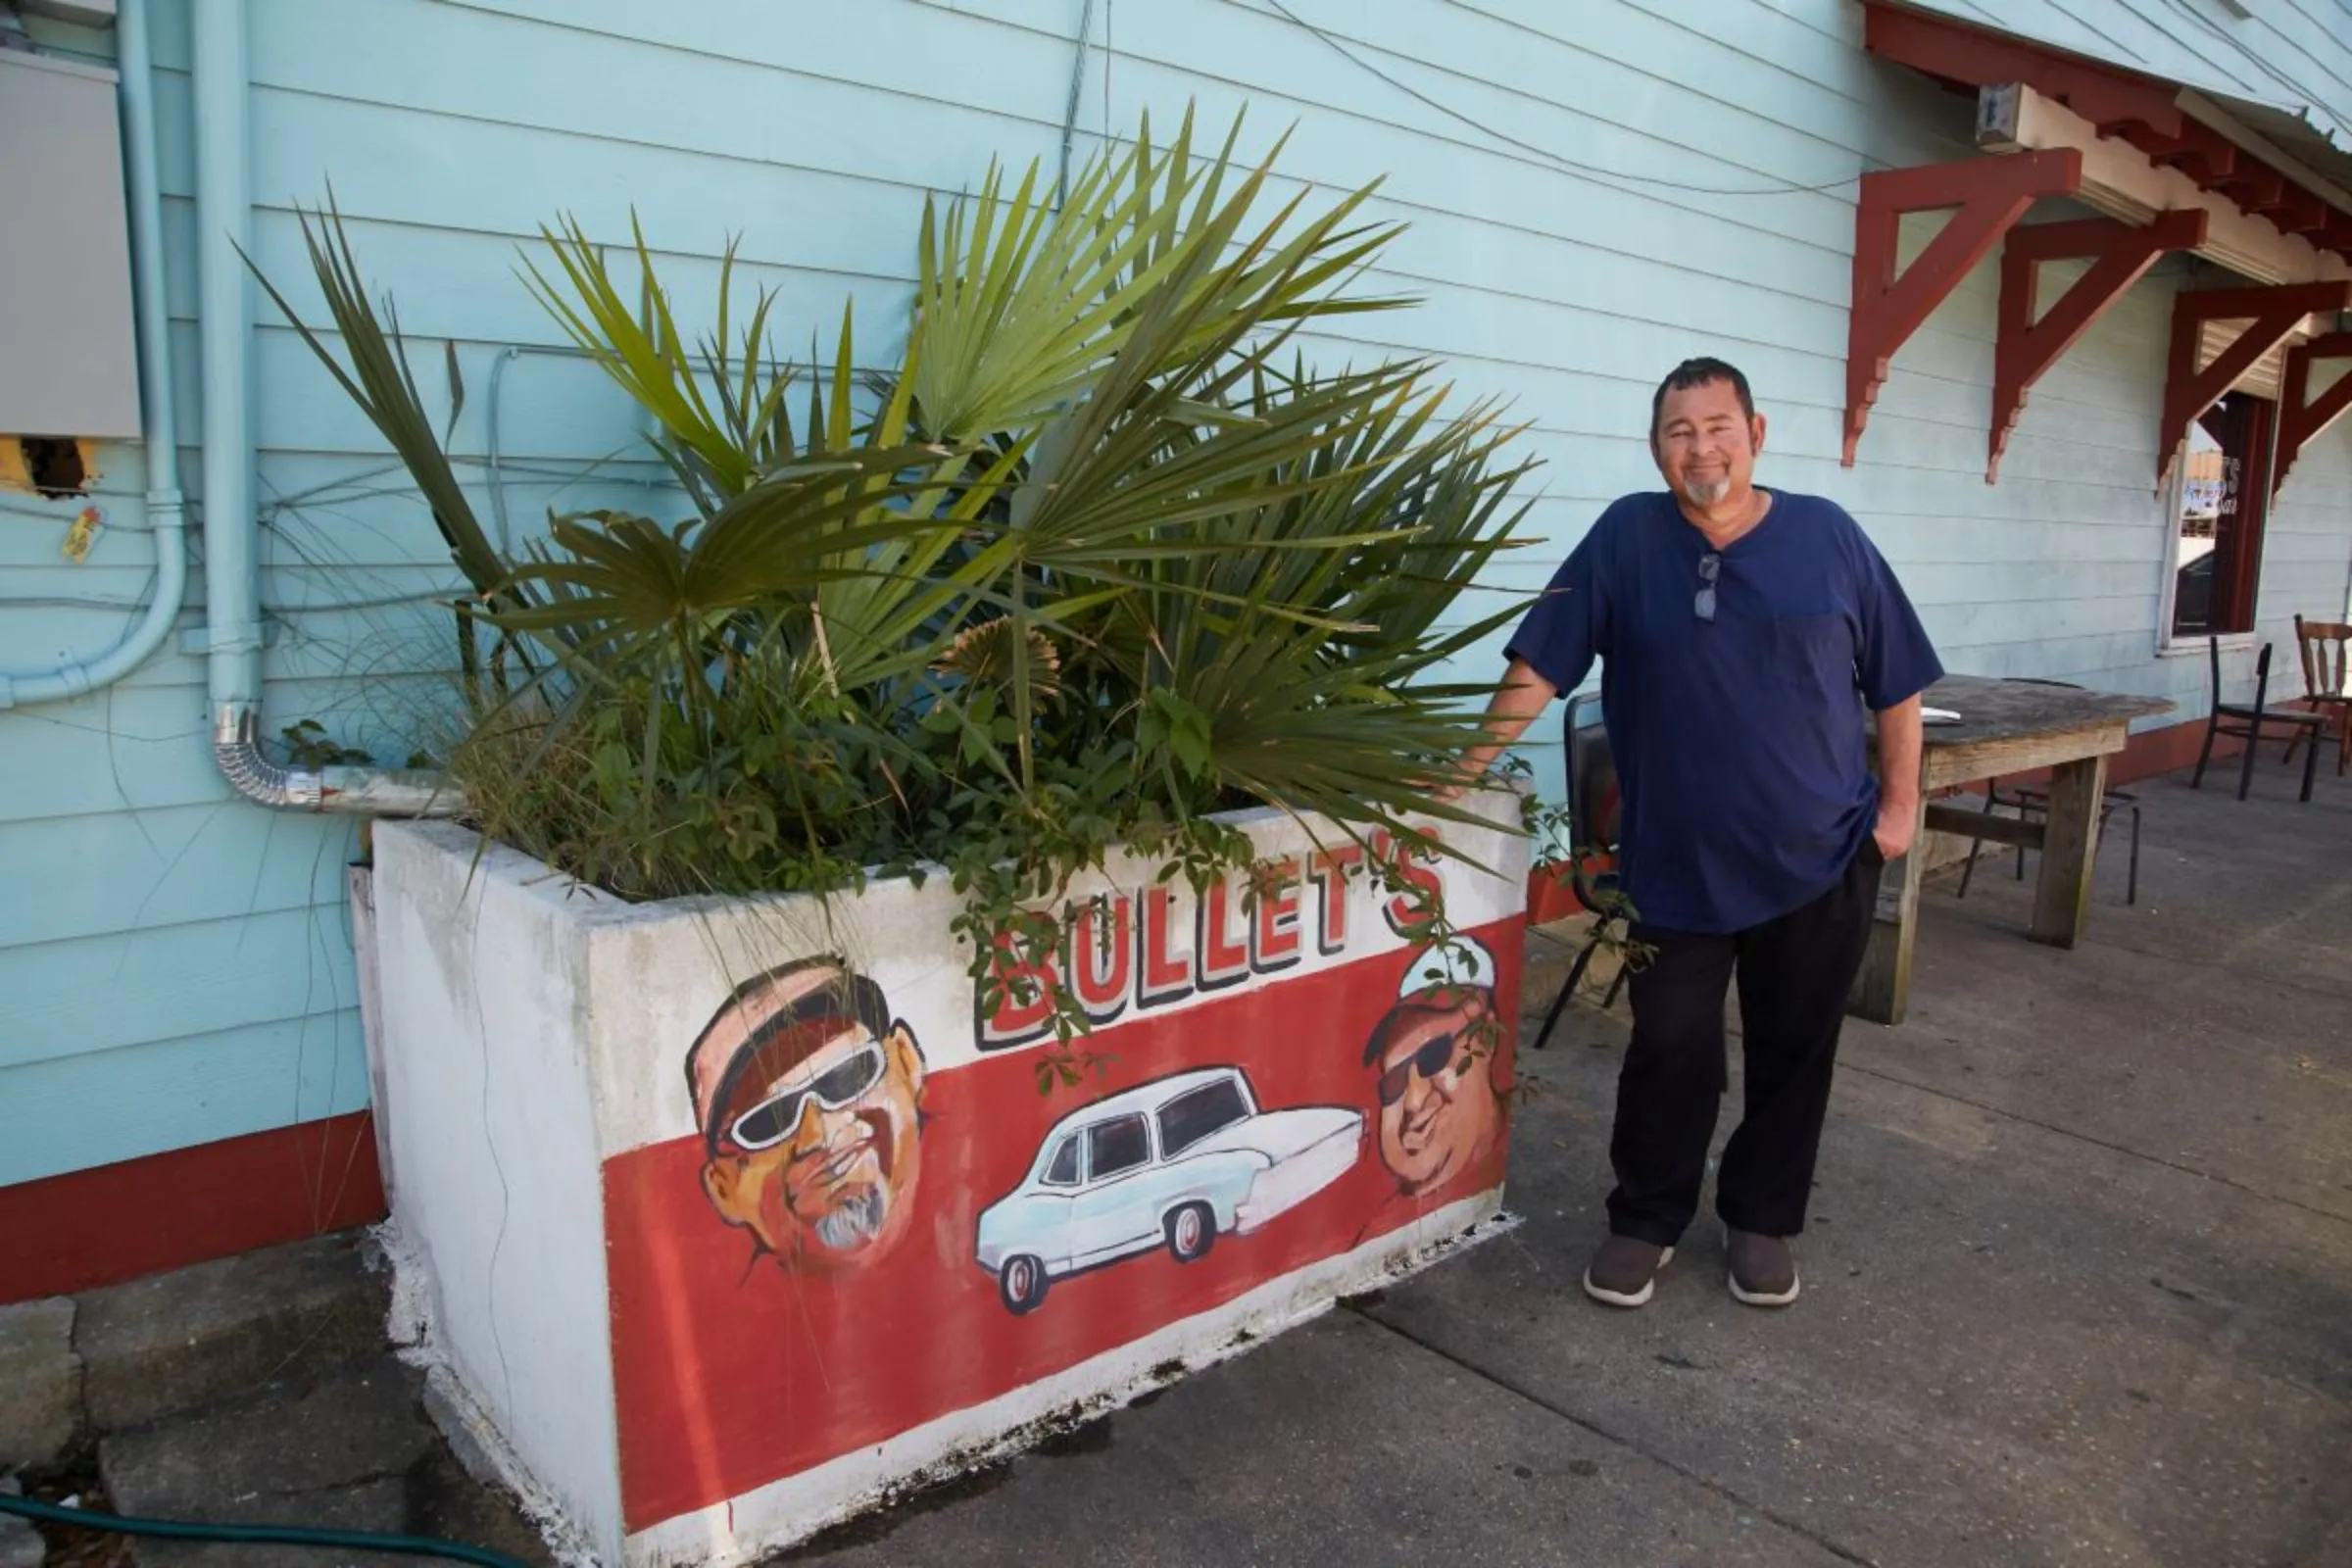 Rollin Garcia, owner of Bullet’s Sports Bar, poses next to a planter box outside his bar in New Orleans, Louisiana, USA, April 19, 2023